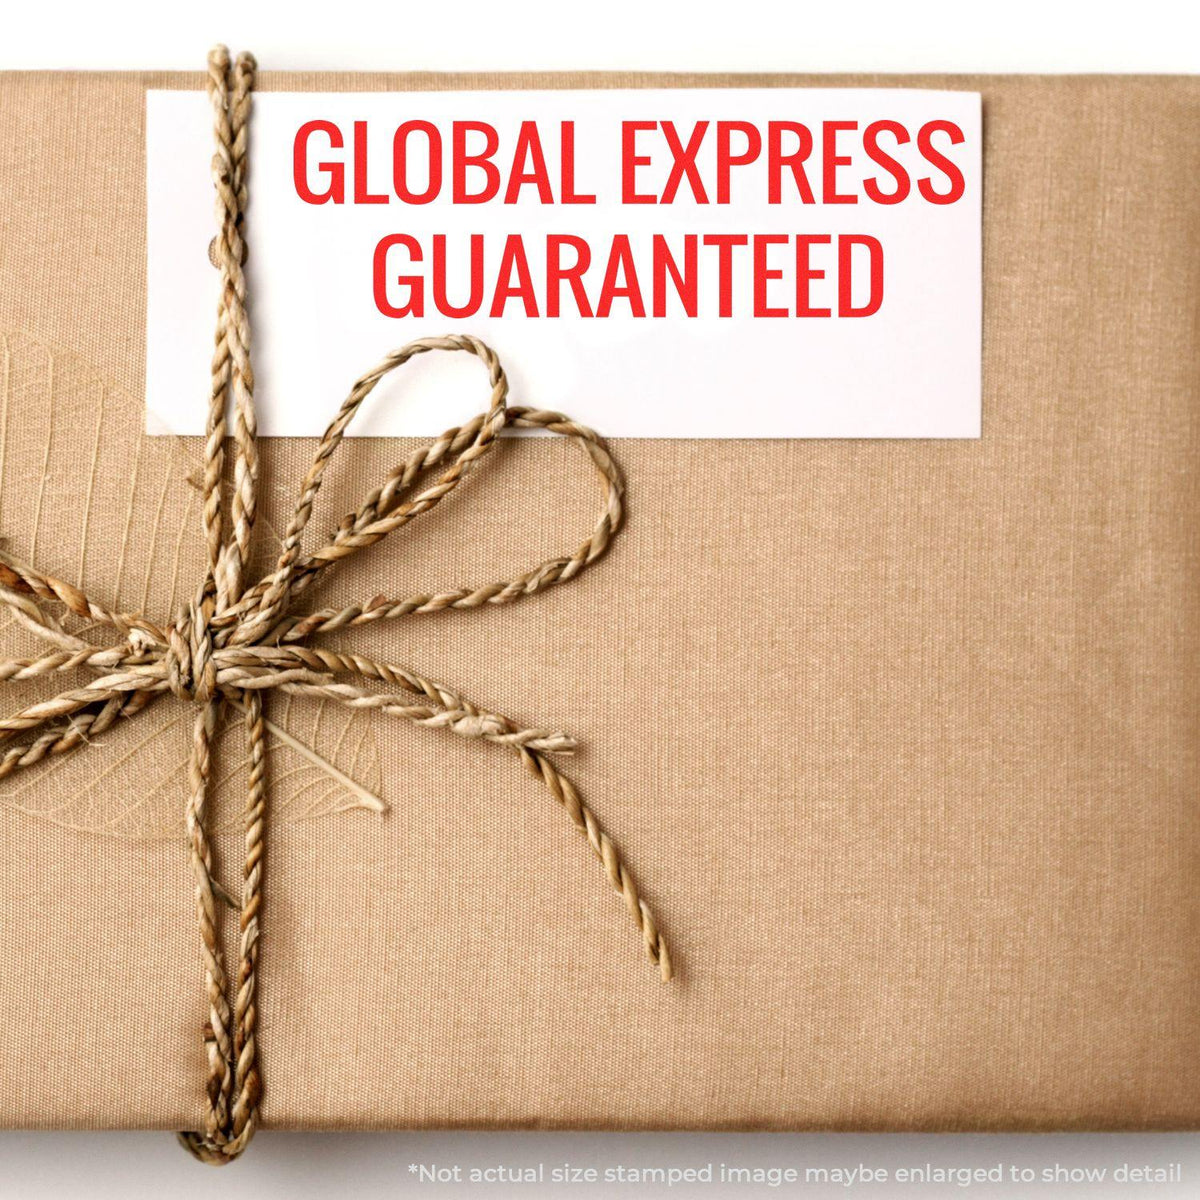 In Use Large Global Express Guaranteed Rubber Stamp Image